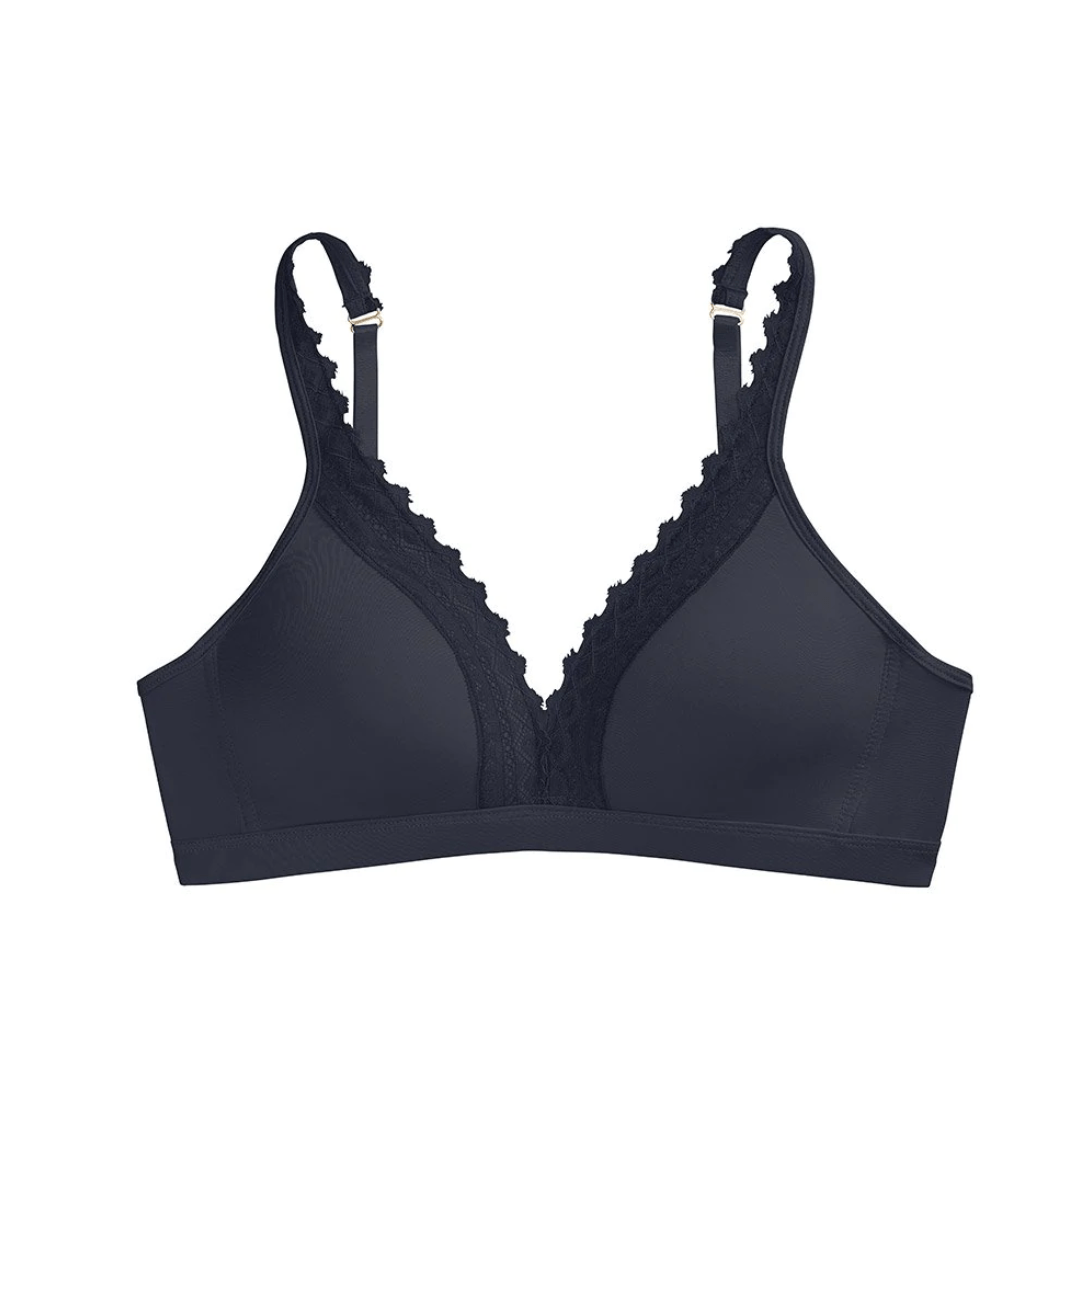 Commando Soft Cup Cotton Bralette in Black - Busted Bra Shop